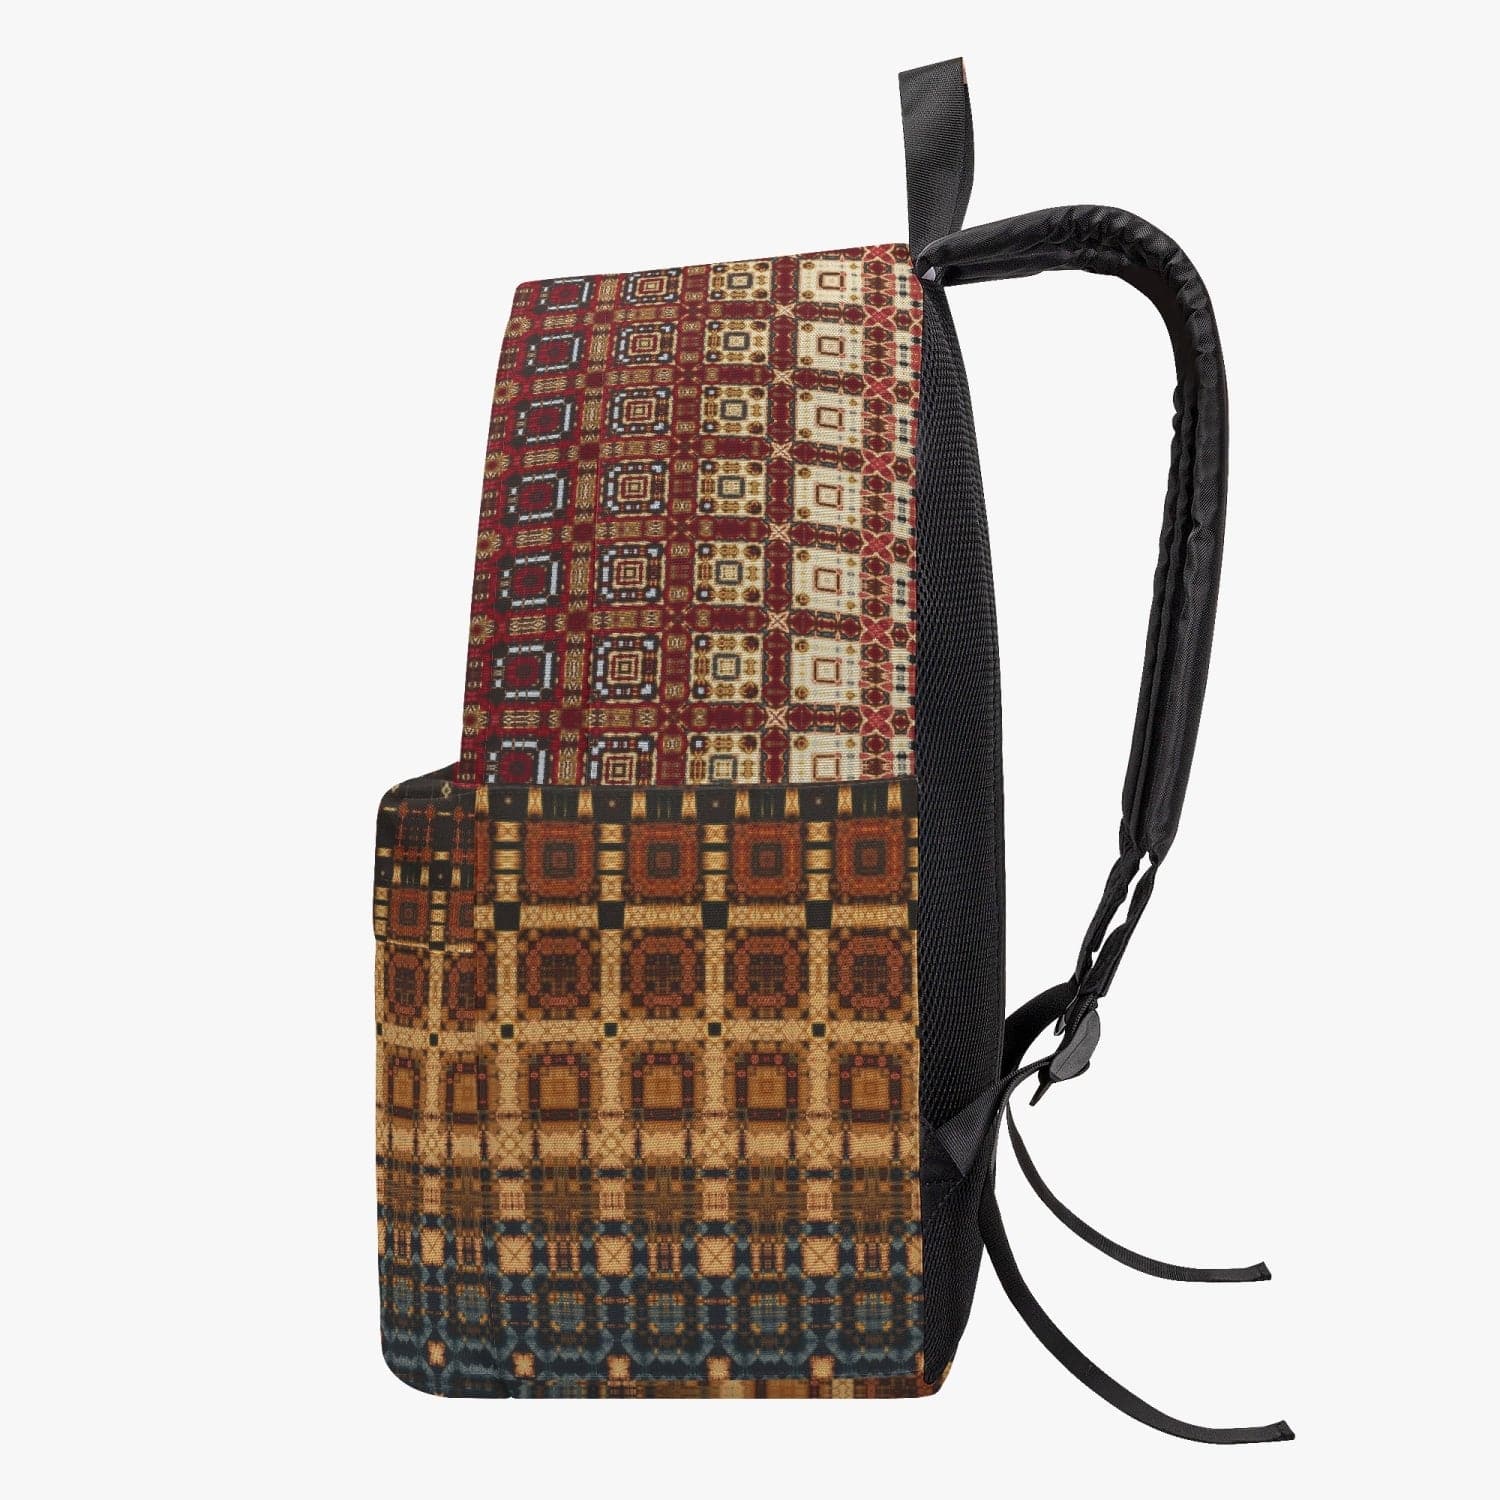 Orange and brown patterned Cotton Canvas Backpack, by Sensus Studio Design